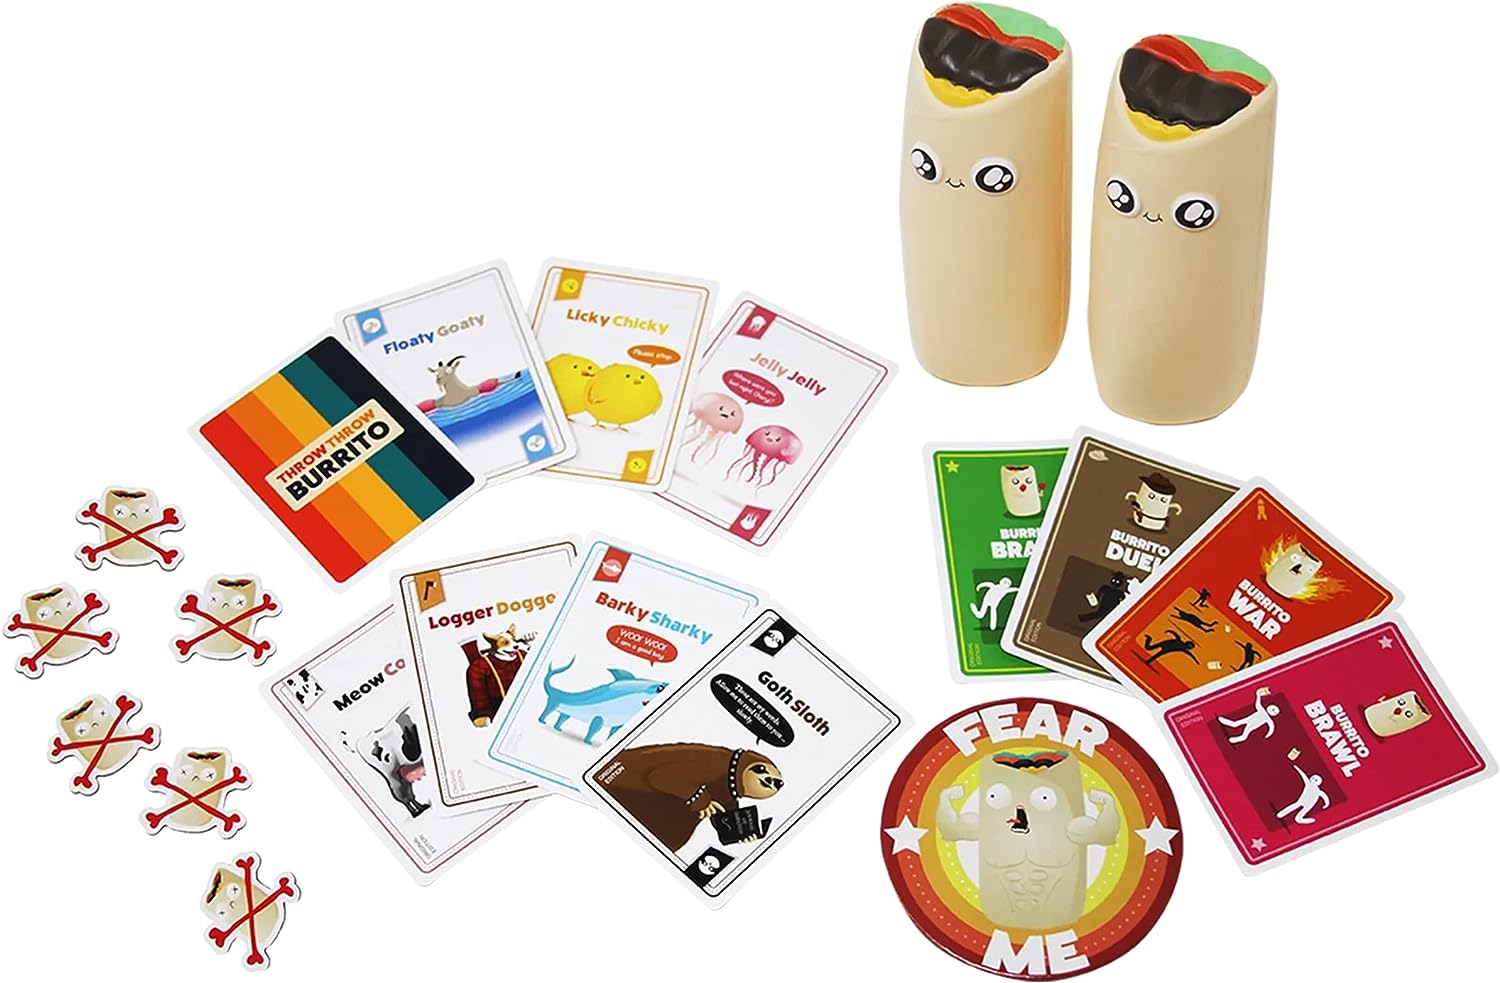 Throw Throw Burrito by Exploding Kittens - A Dodgeball Card Game - Family-Friendly Party Games